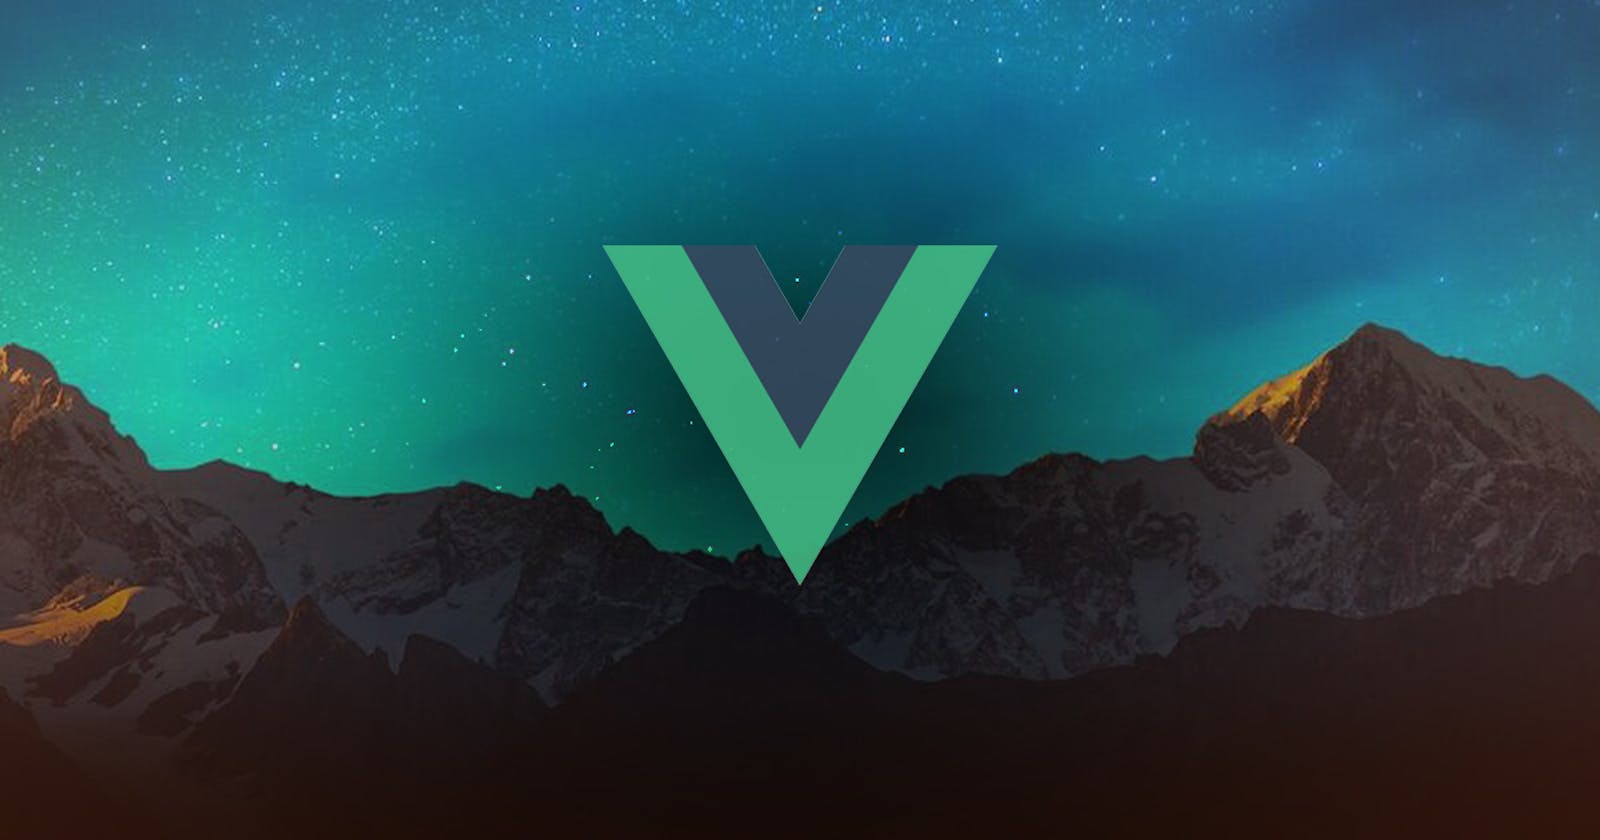 An introduction to using Vue3 for beginners